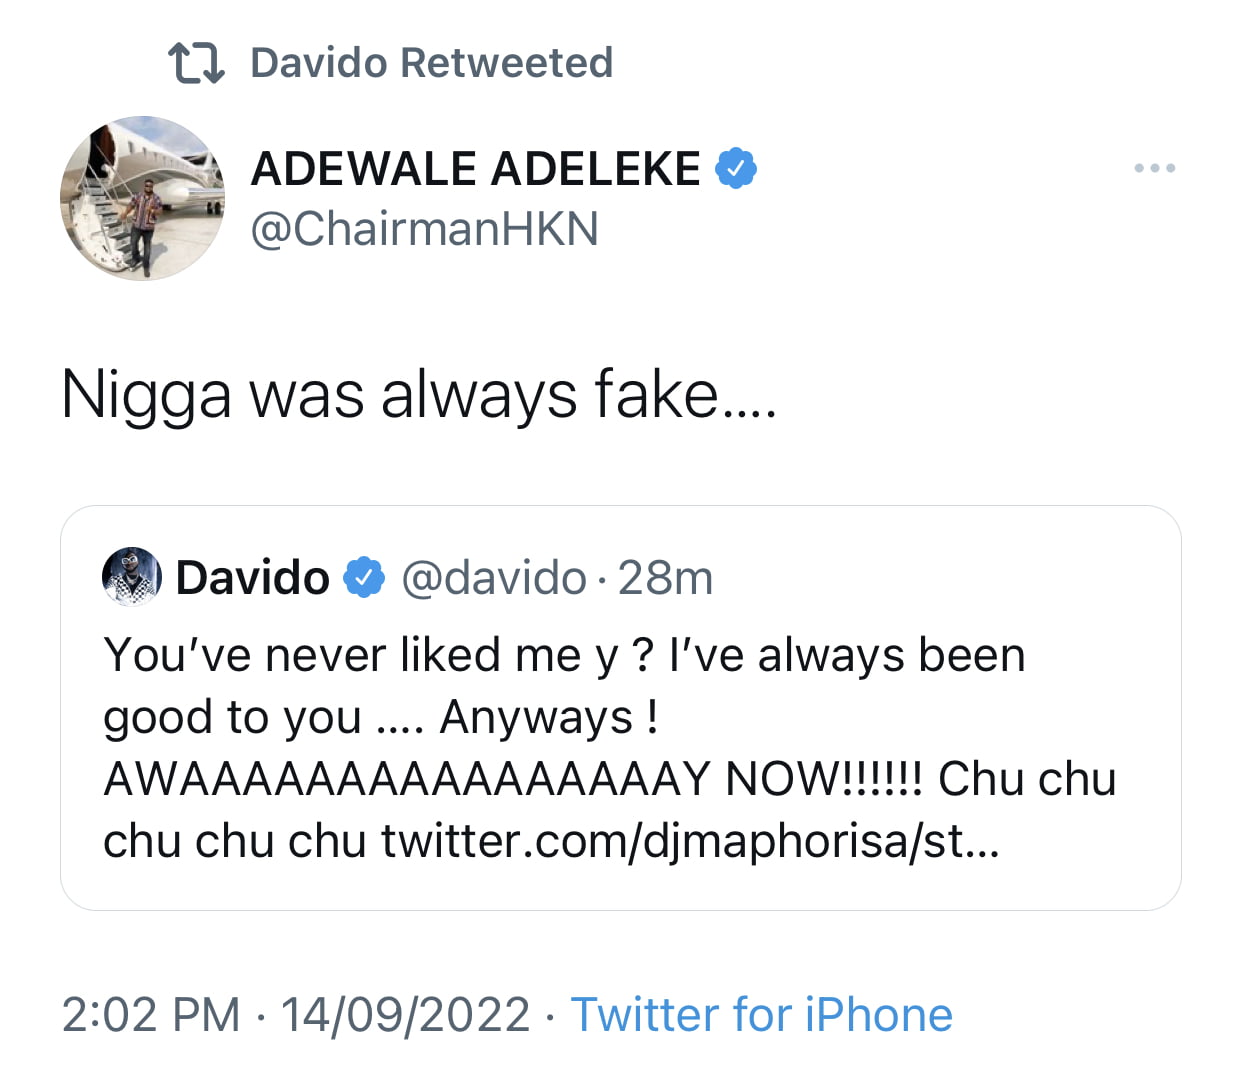 Why have you never liked me - Davido confronts DJ Maphorisa after he praised Wizkid over him